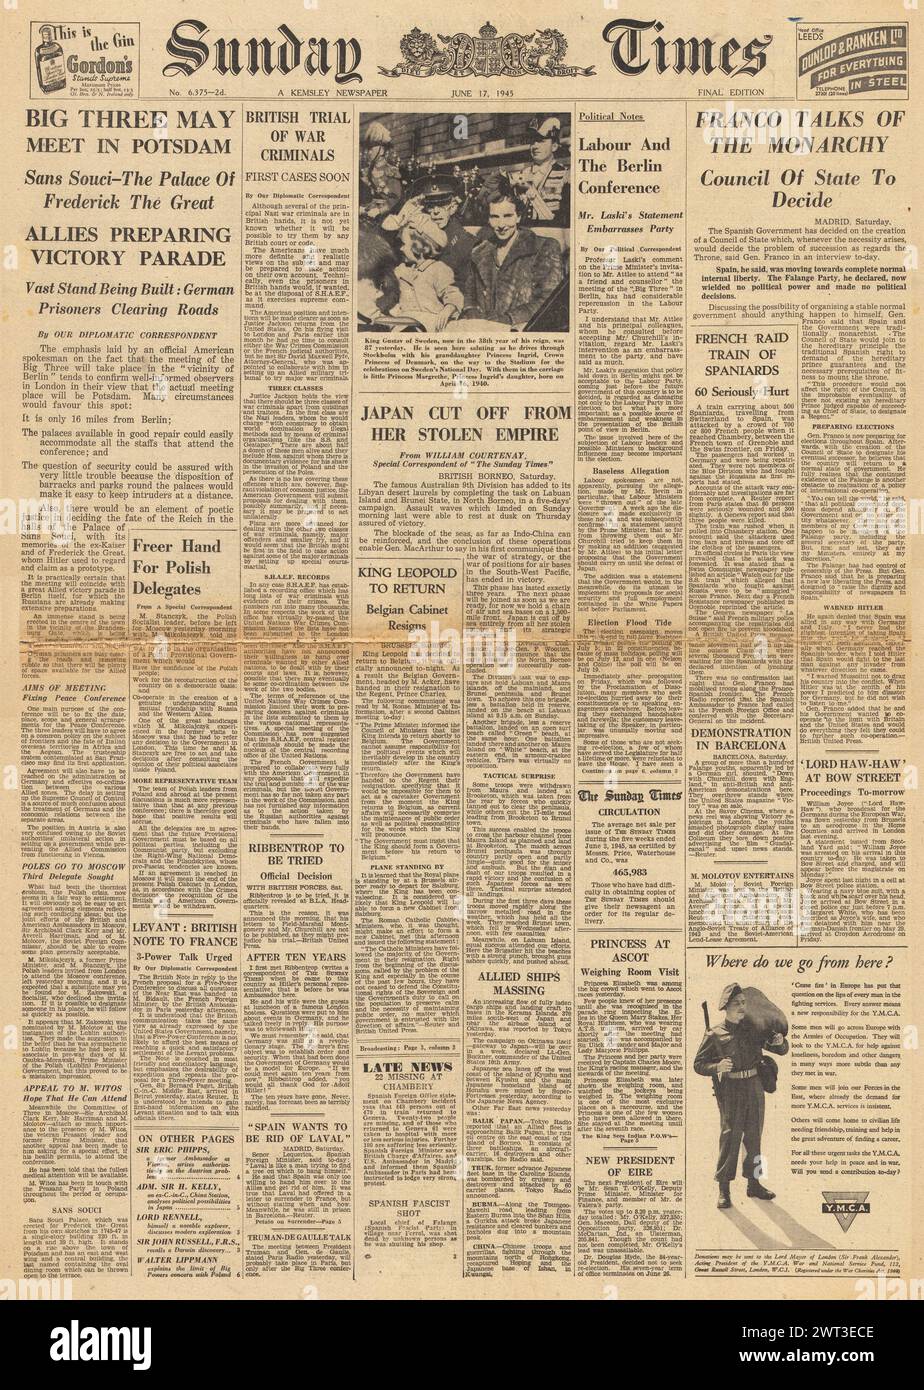 1945 Sunday Times front page reporting Big Three to meet at Potsdam, War Crimes trials to begin, Japan cut off and Franco speaks of monarchy Stock Photo